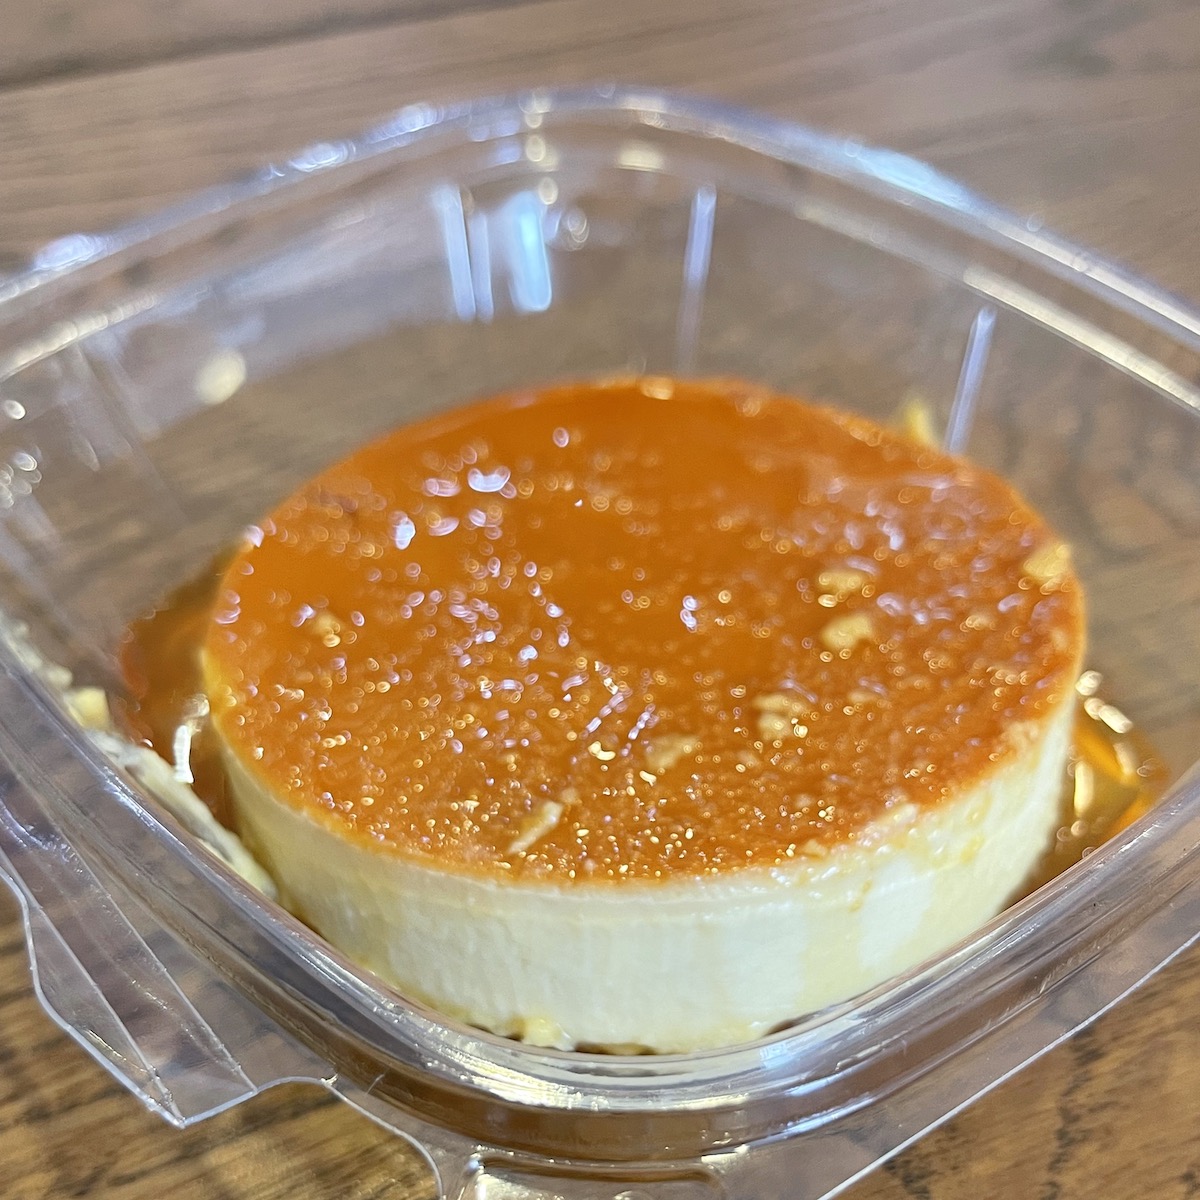 White Chocolate Flan de Queso from Cuento Sandwiches in Doral, Florida